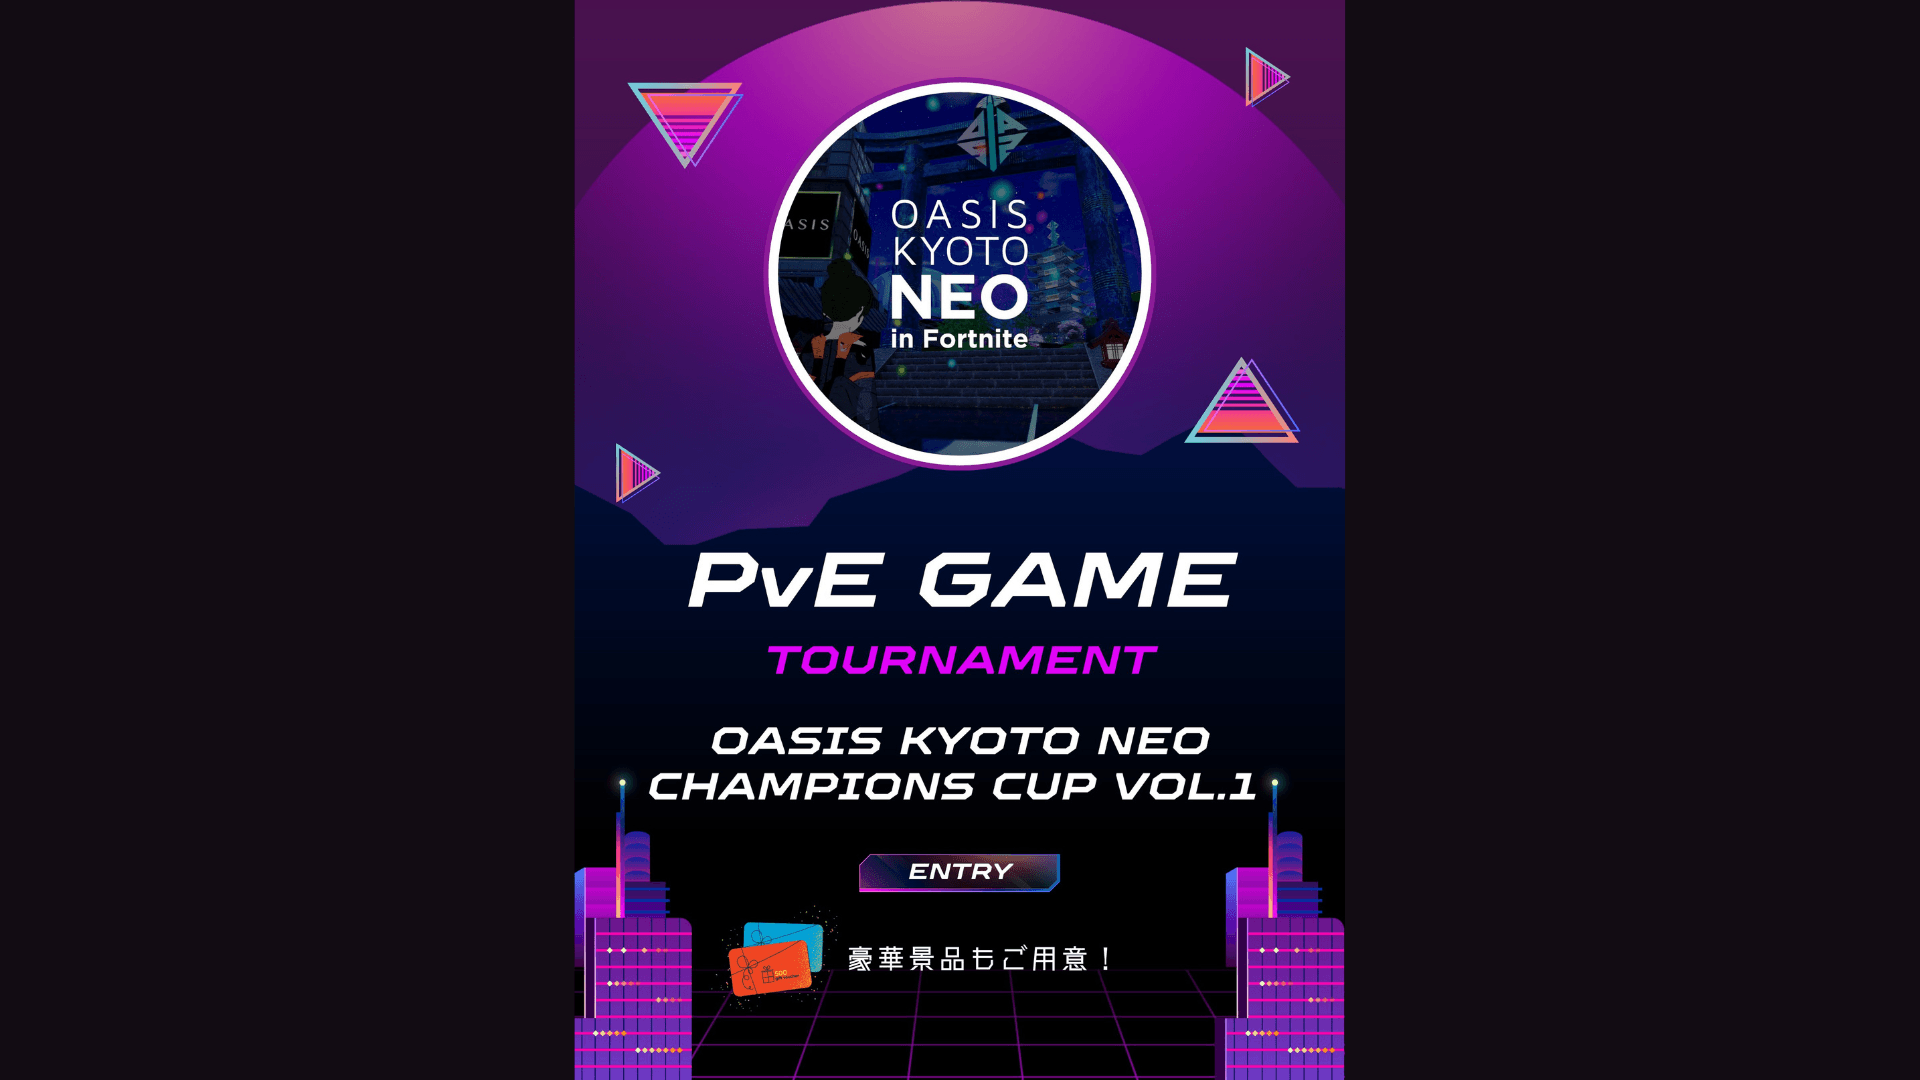 OASIS KYOTO NEO CHAMPIONS CUP Vol.1 in Fortnite feature image